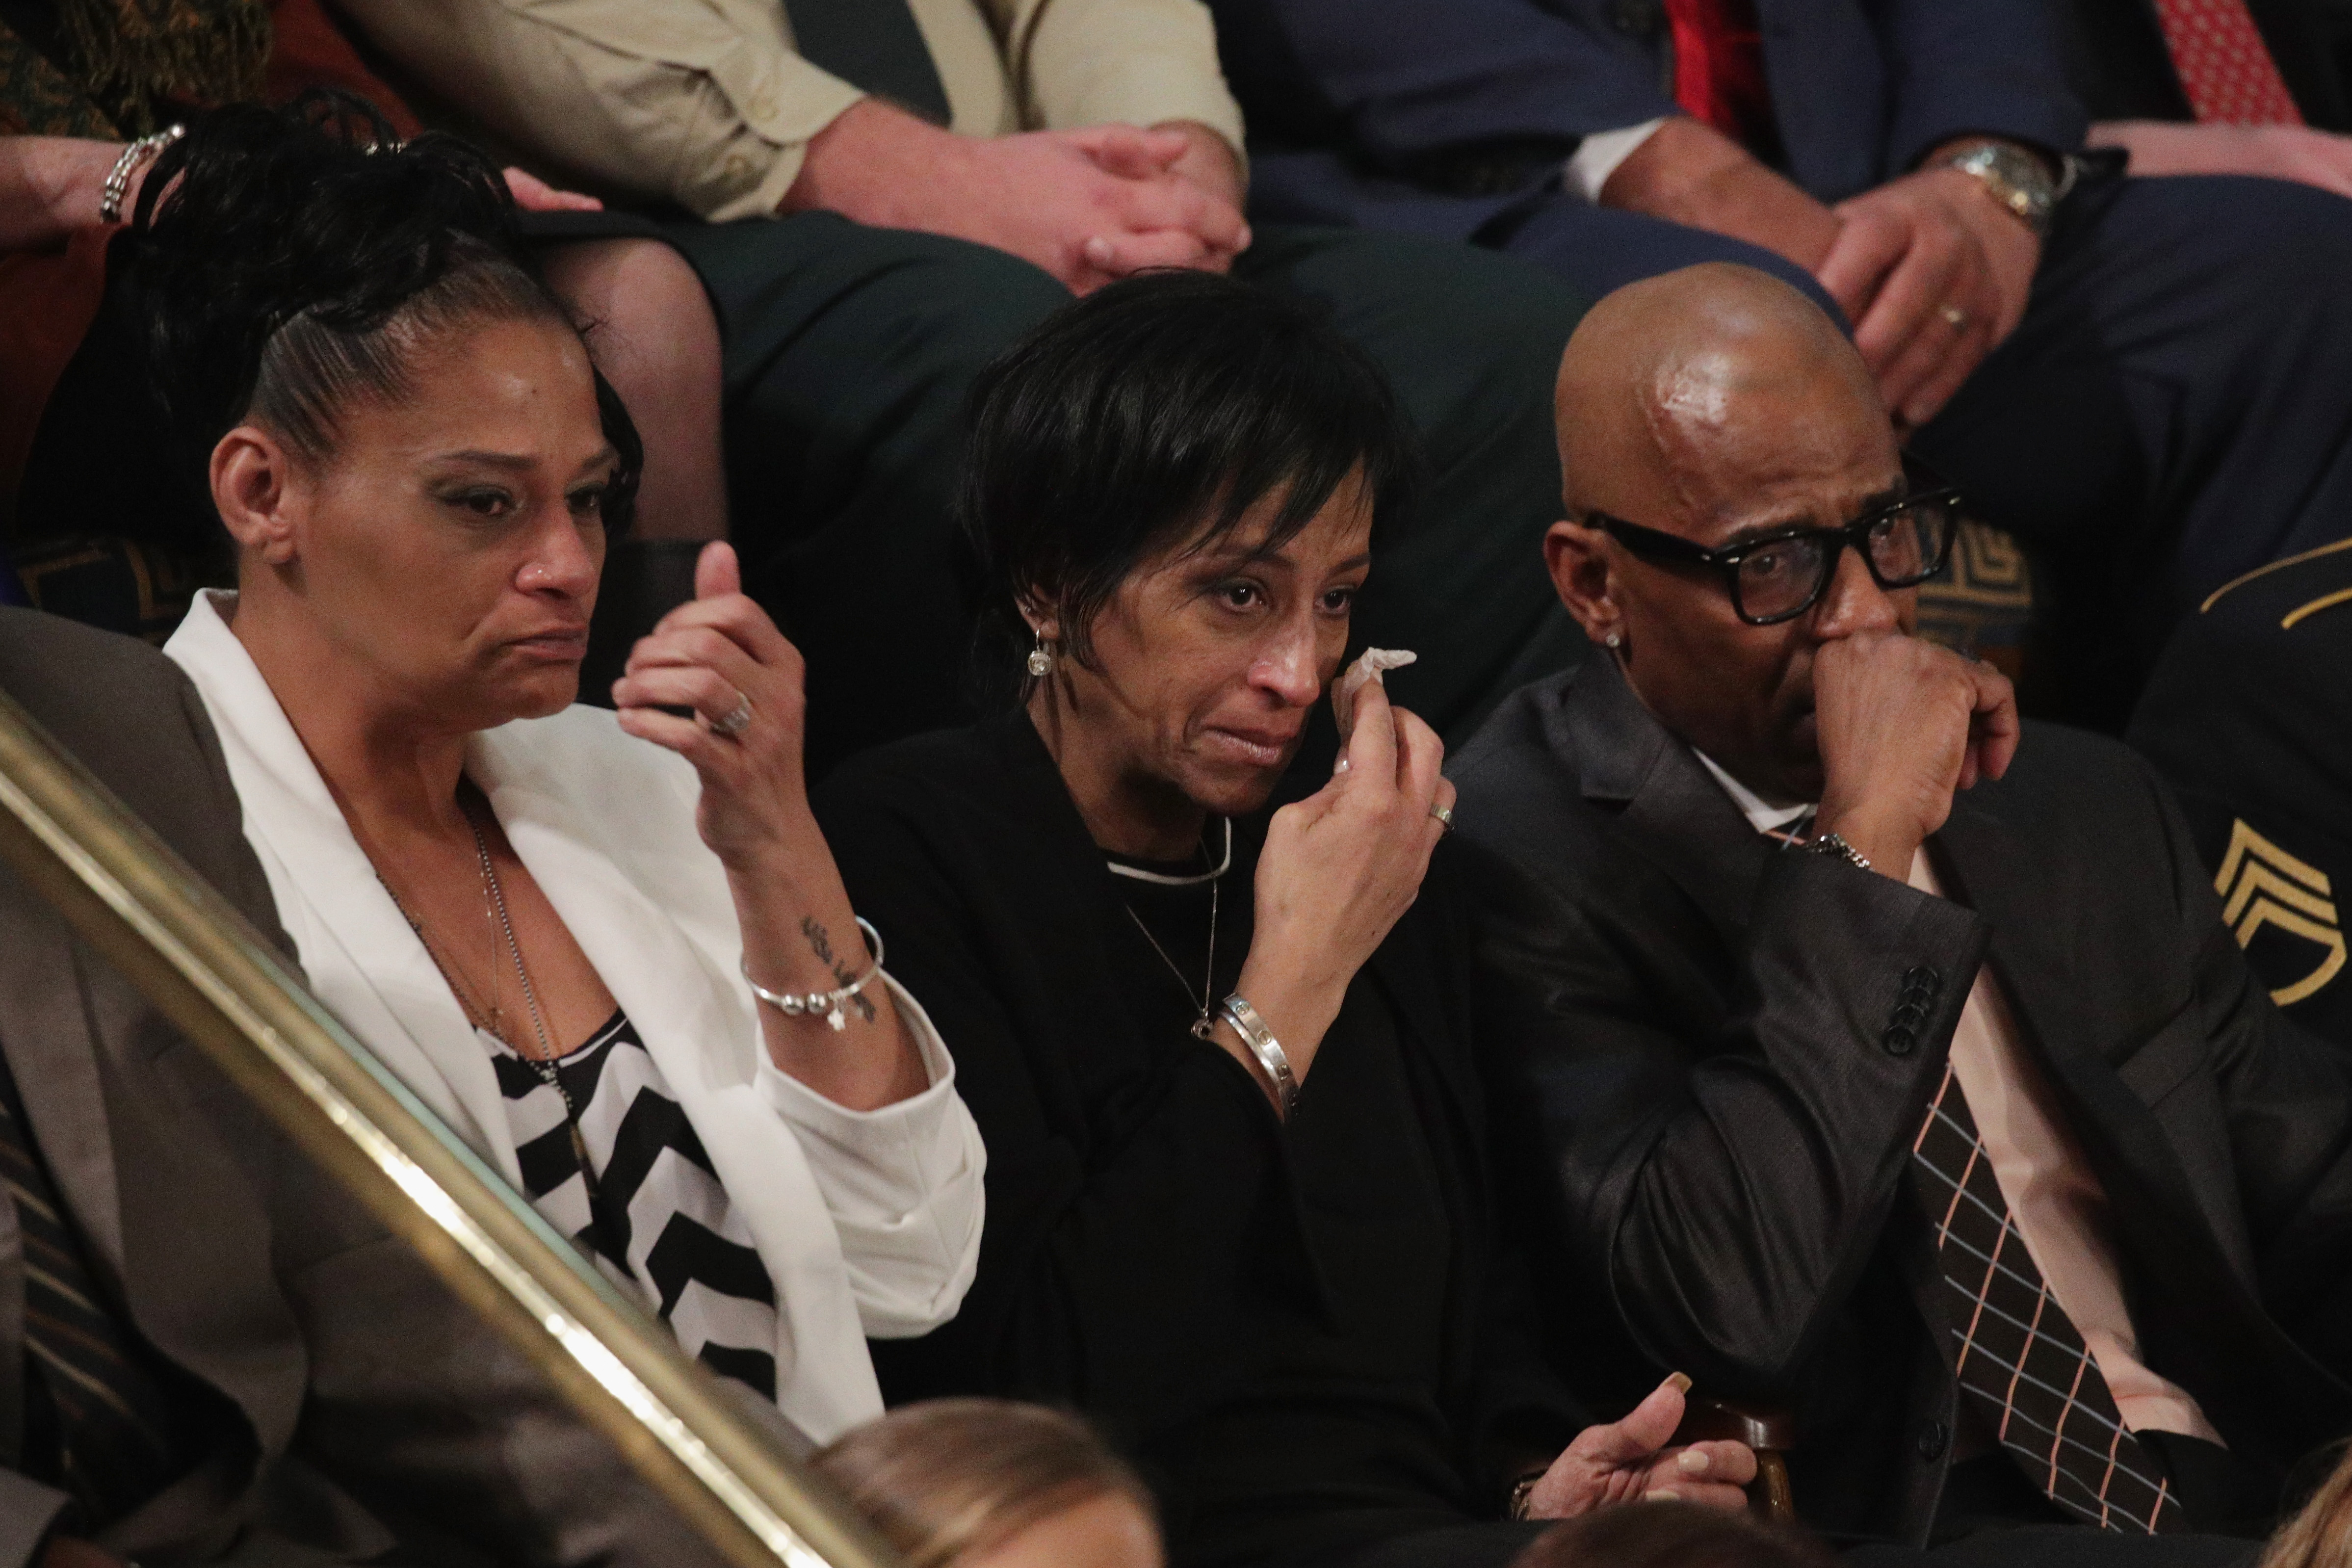 Elzabeth Alvarado, Evelyn Rodriguez and Freddy Cuevas, parents of children who were murdered by MS-13 watch as U.S. President Donald J. Trump delivers the State of the Union address in the chamber of the U.S. House of Representatives January 30, 2018 in Washington, DC. (Alex Wong&mdash;Getty Images)